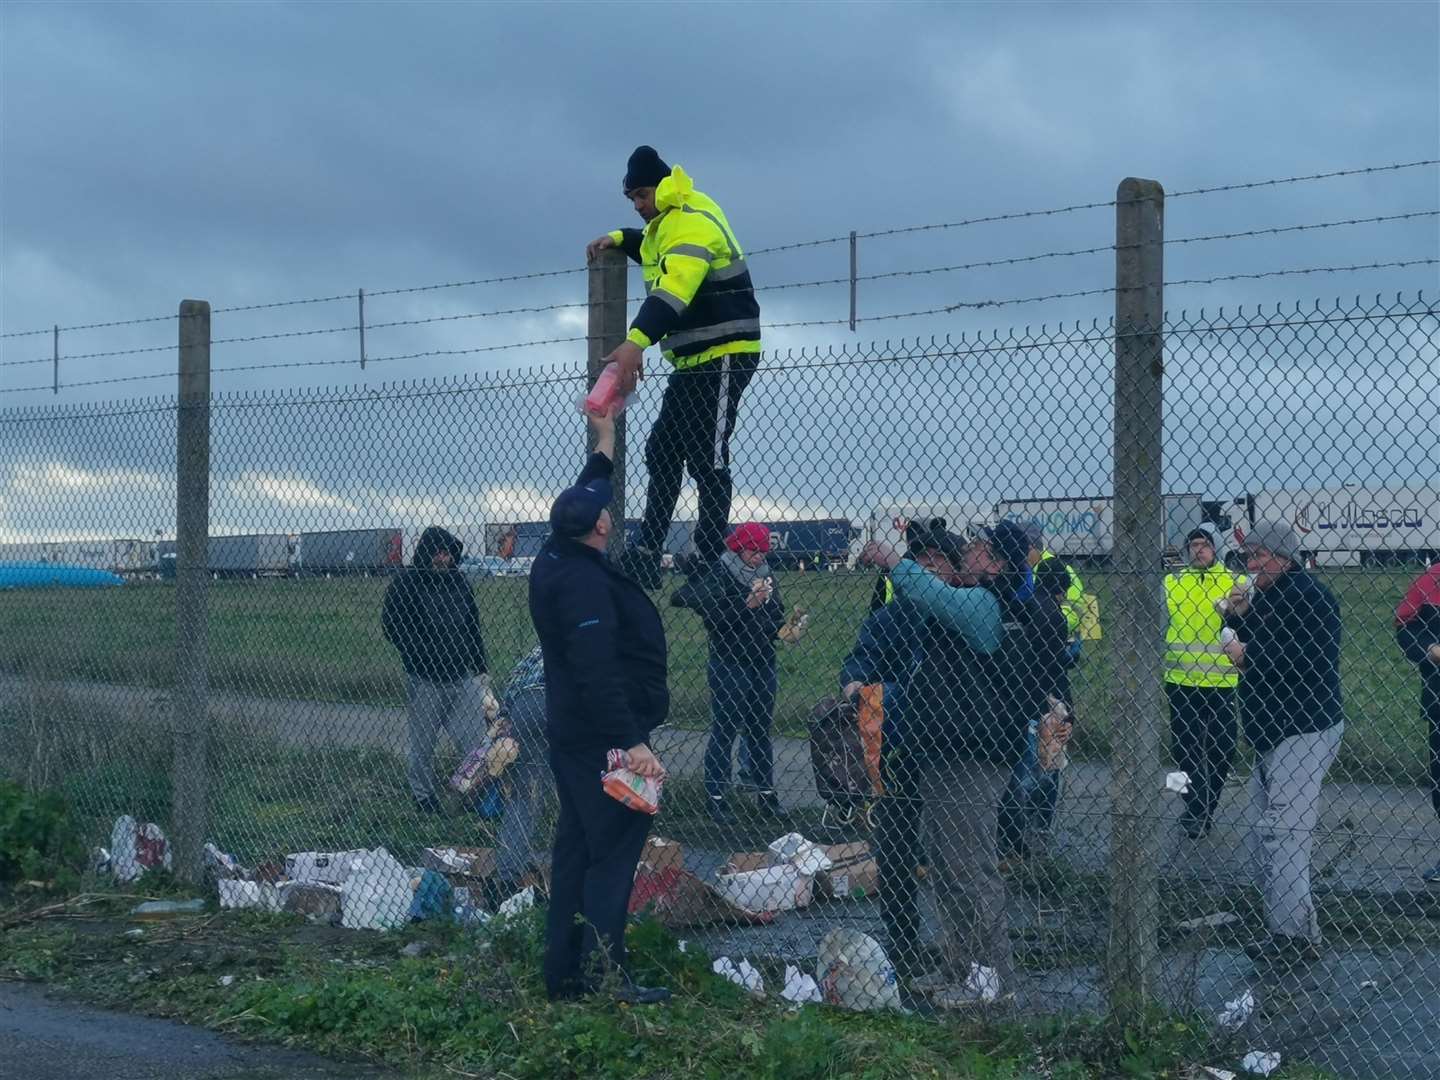 Food being handed over the fence to truckers at Manston on Christmas Eve morning